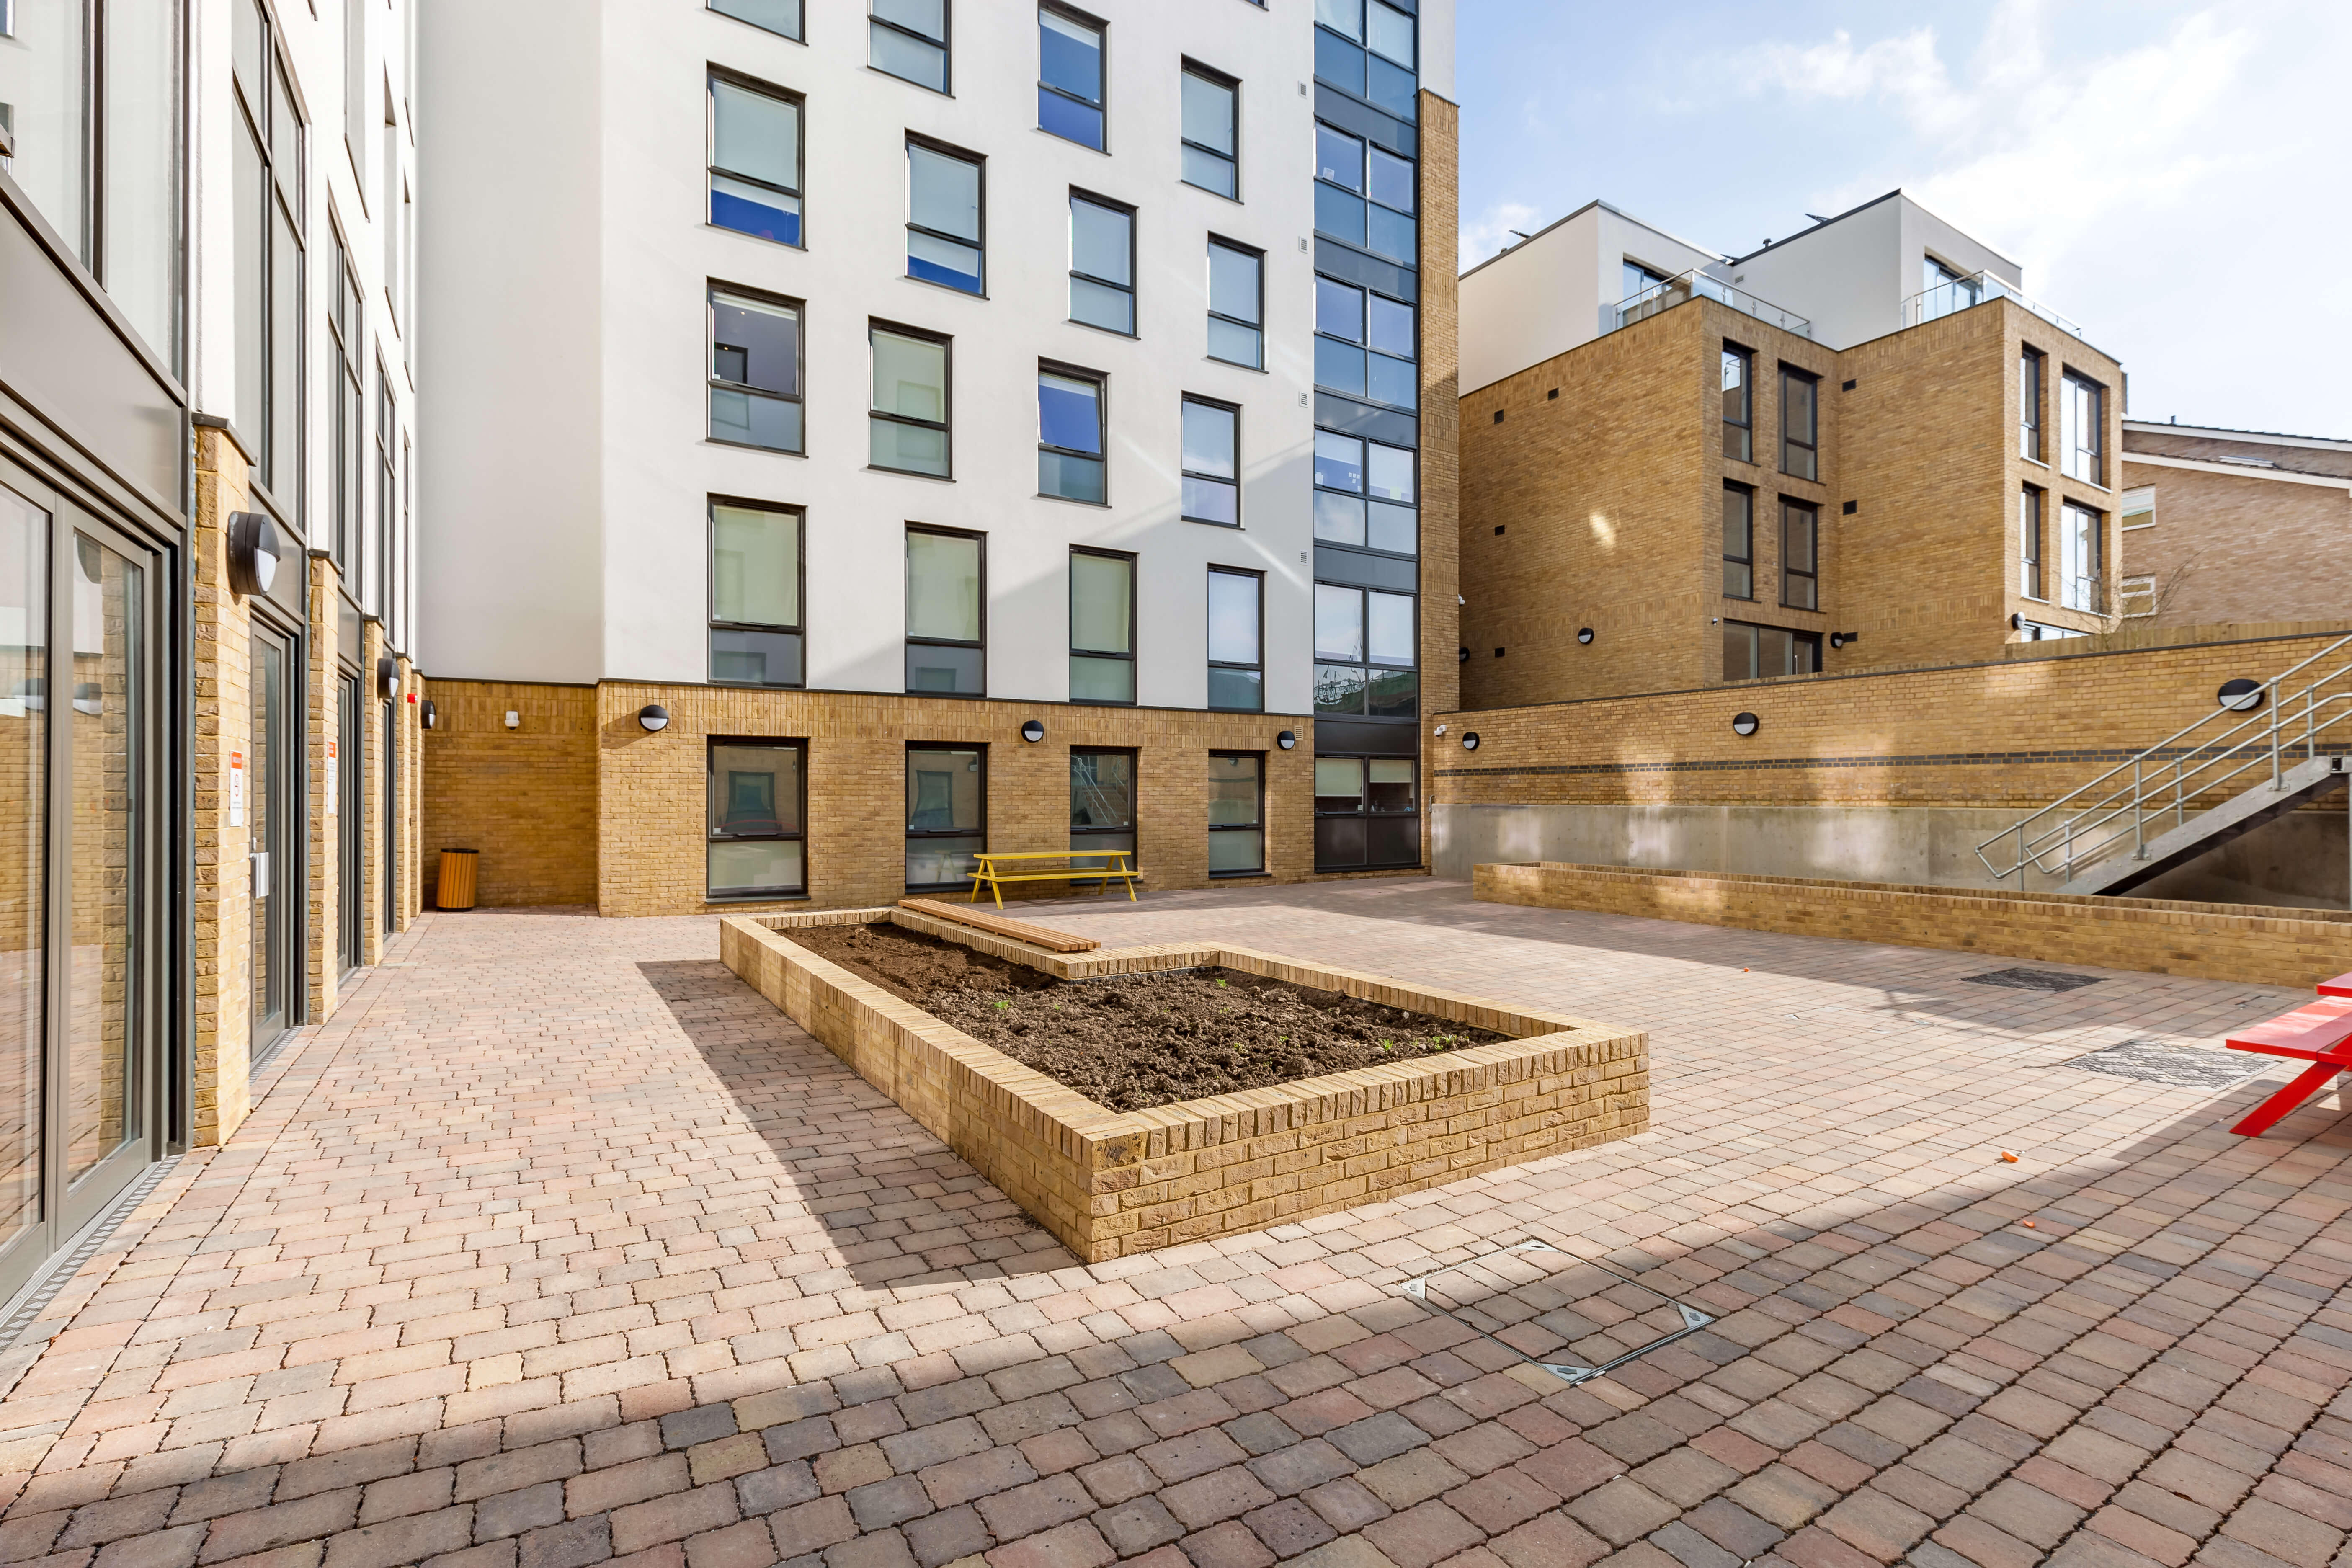 Unite Students accommodation at Beech House in Oxford